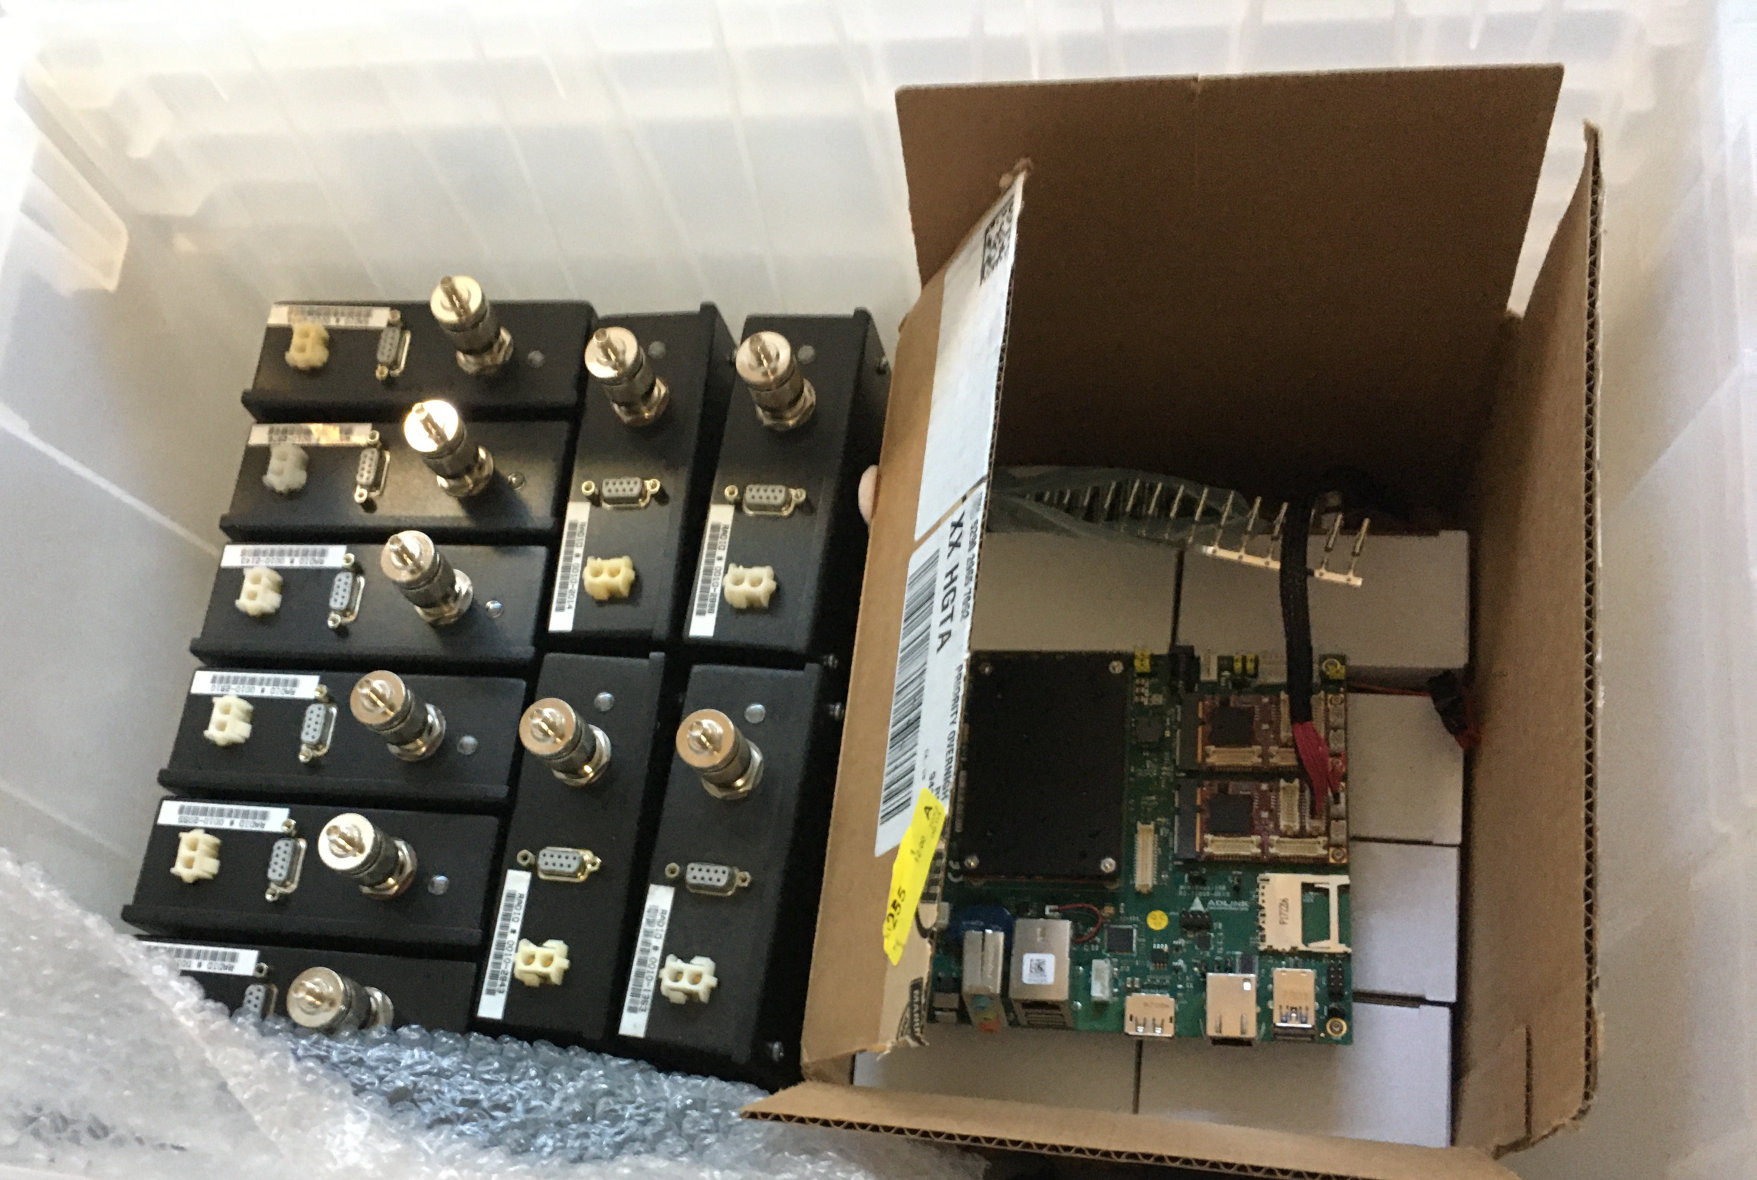 Moving box stuffed with Ricochet modems, power supplies, and a Adlink carrier board.